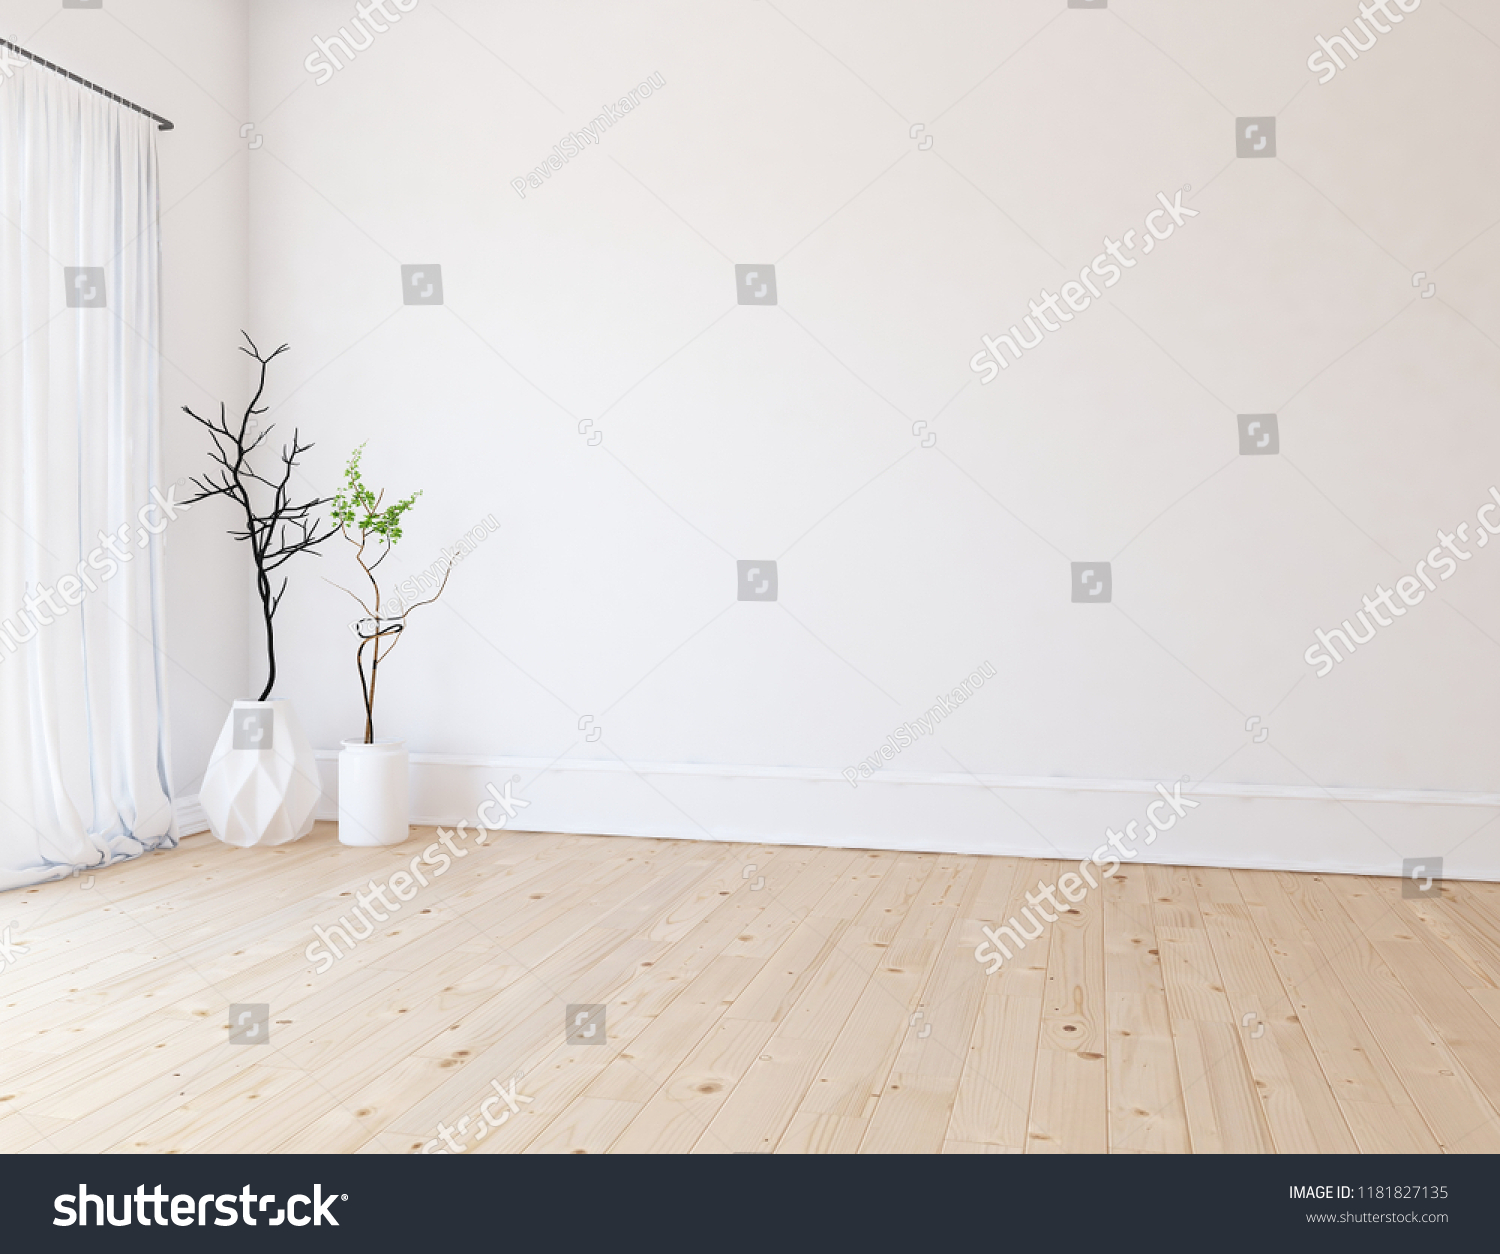 Idea of a white empty scandinavian room interior with vases on the wooden floor and large wall and white landscape in window with curtains. Home nordic interior. 3D illustration #1181827135